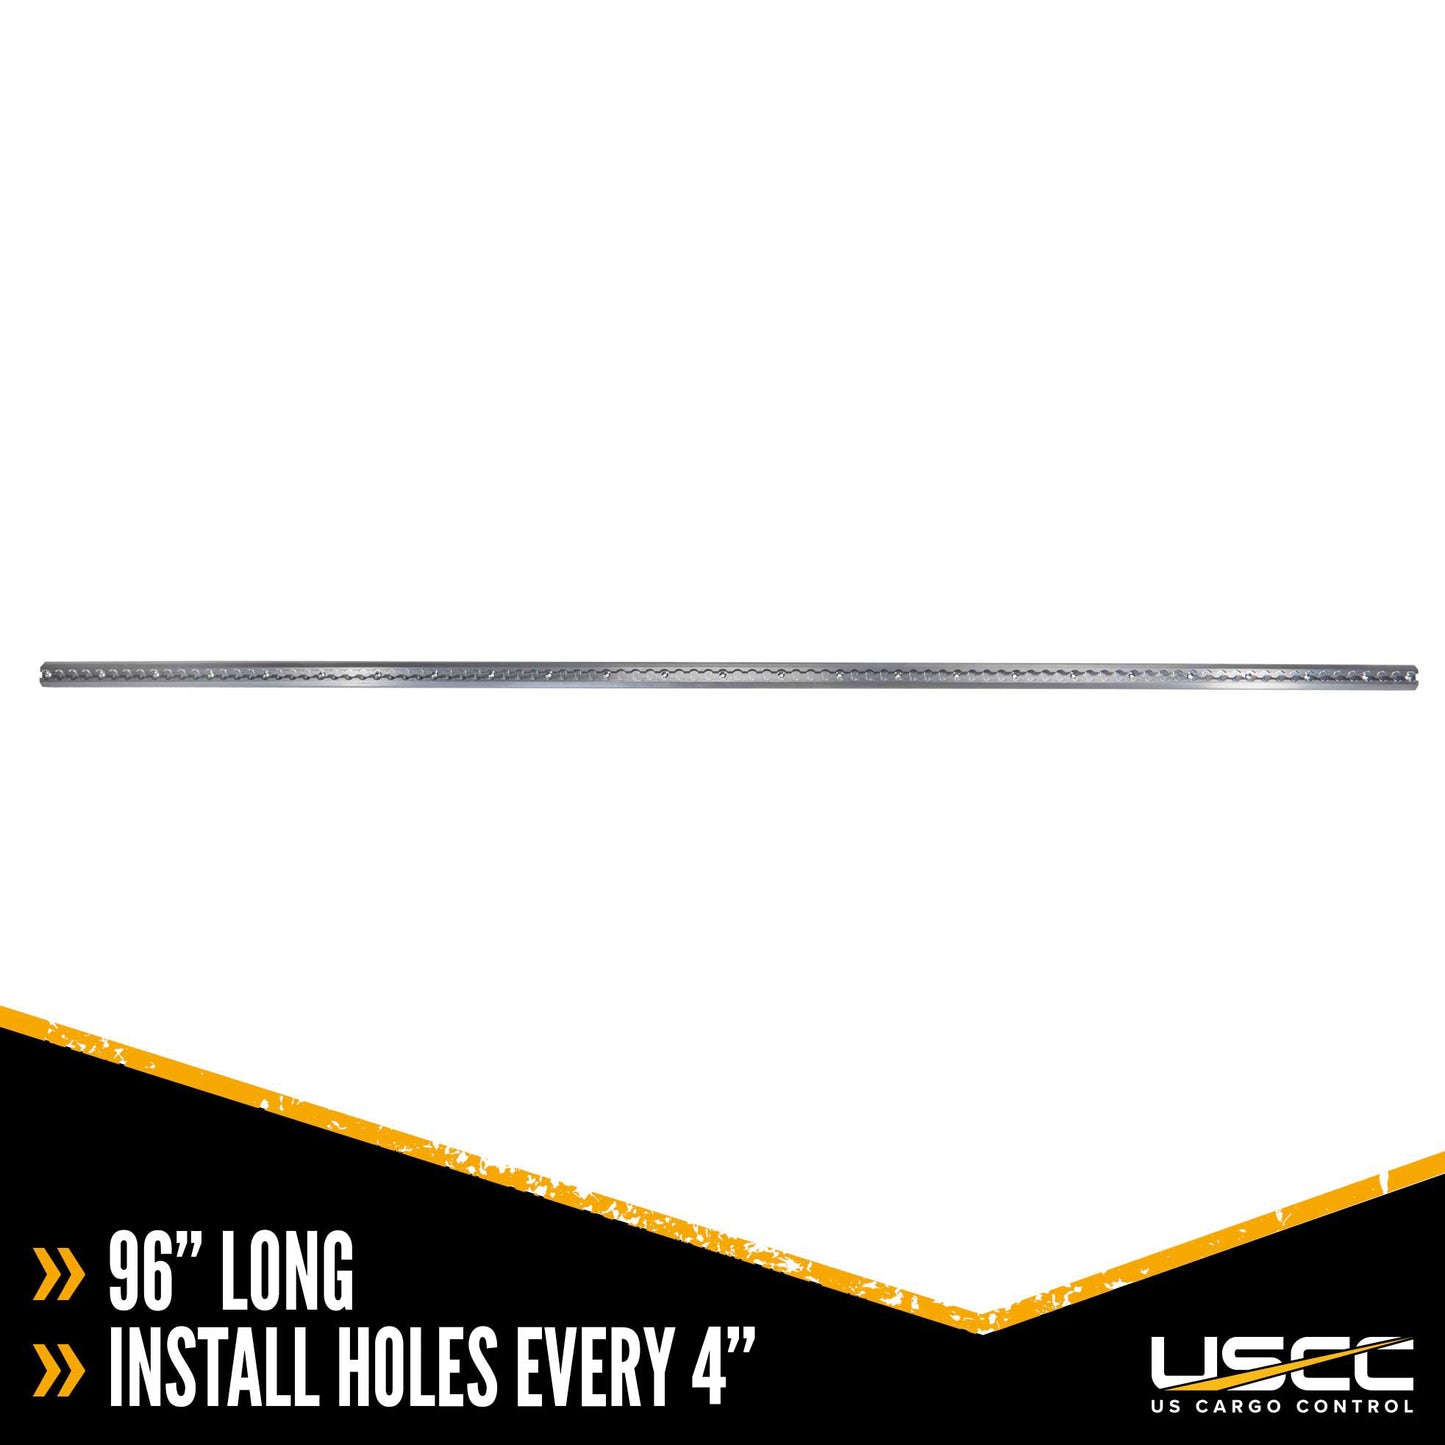 L-track is 96" long with install holes every 4"